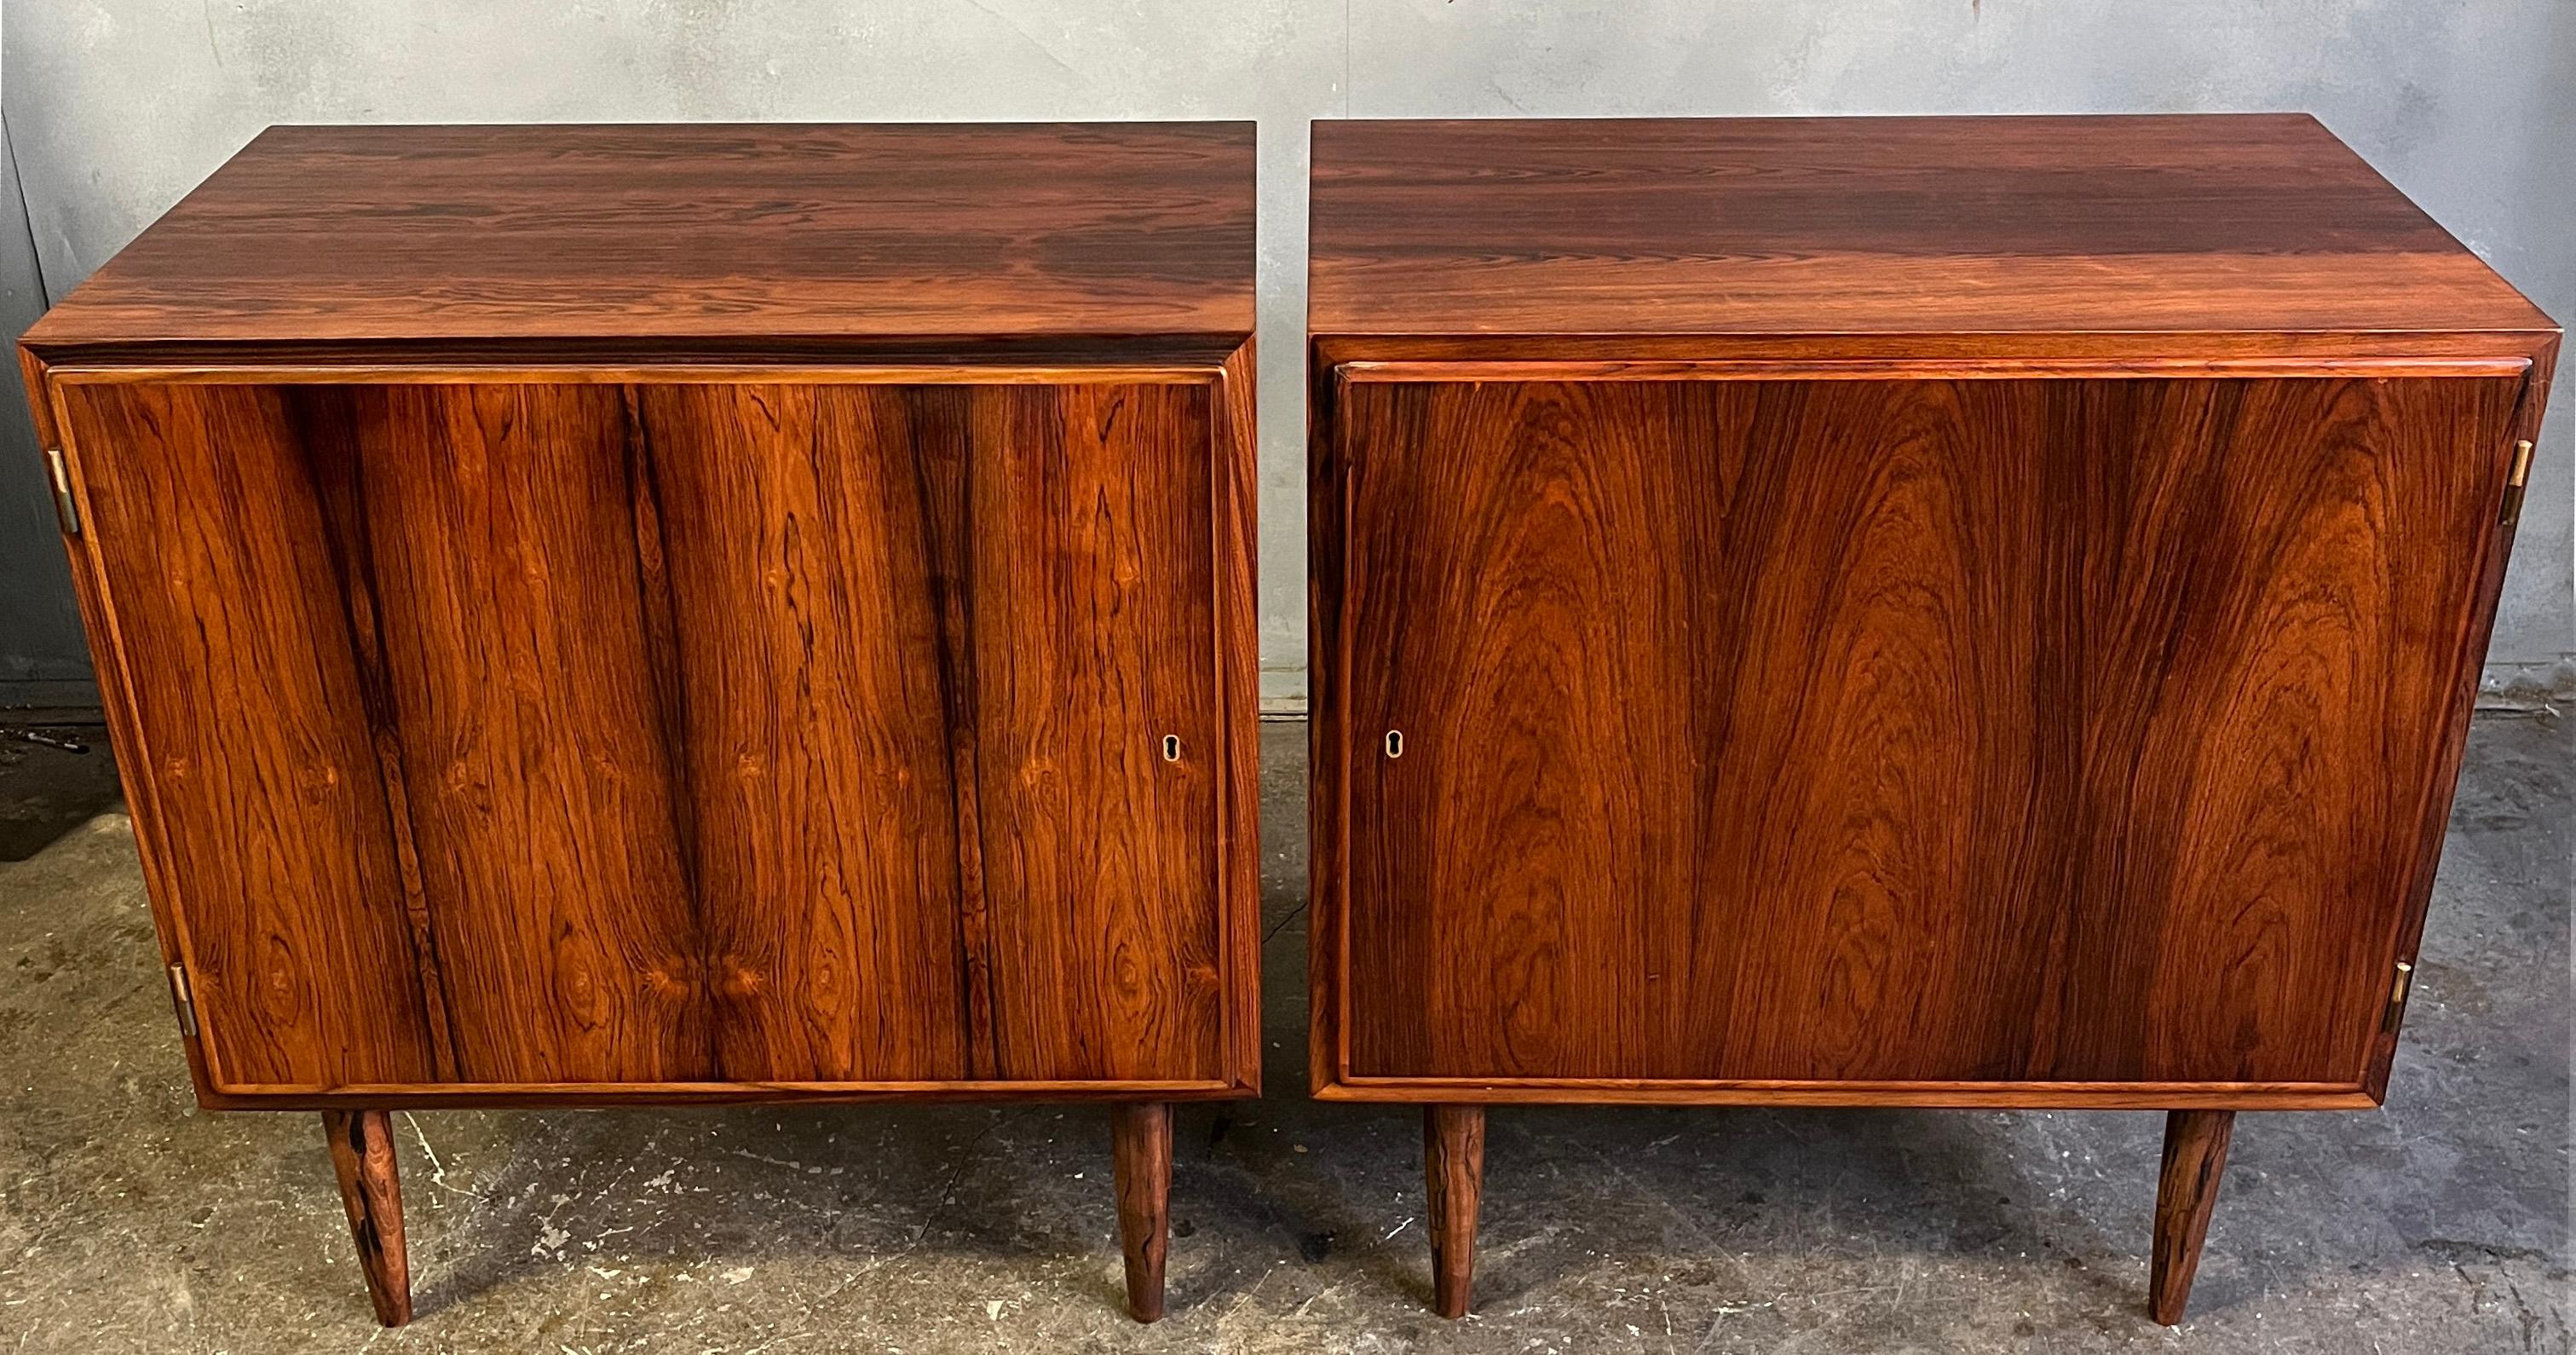 Midcentury modern small sideboards designed by Carlo Jensen and made by Hundevad & Co. These small cabinets have a beautiful figured grain highlighted by brass hardware. perfect for nightstands or storing your vinyl LP's.  Rarely seen in this size.